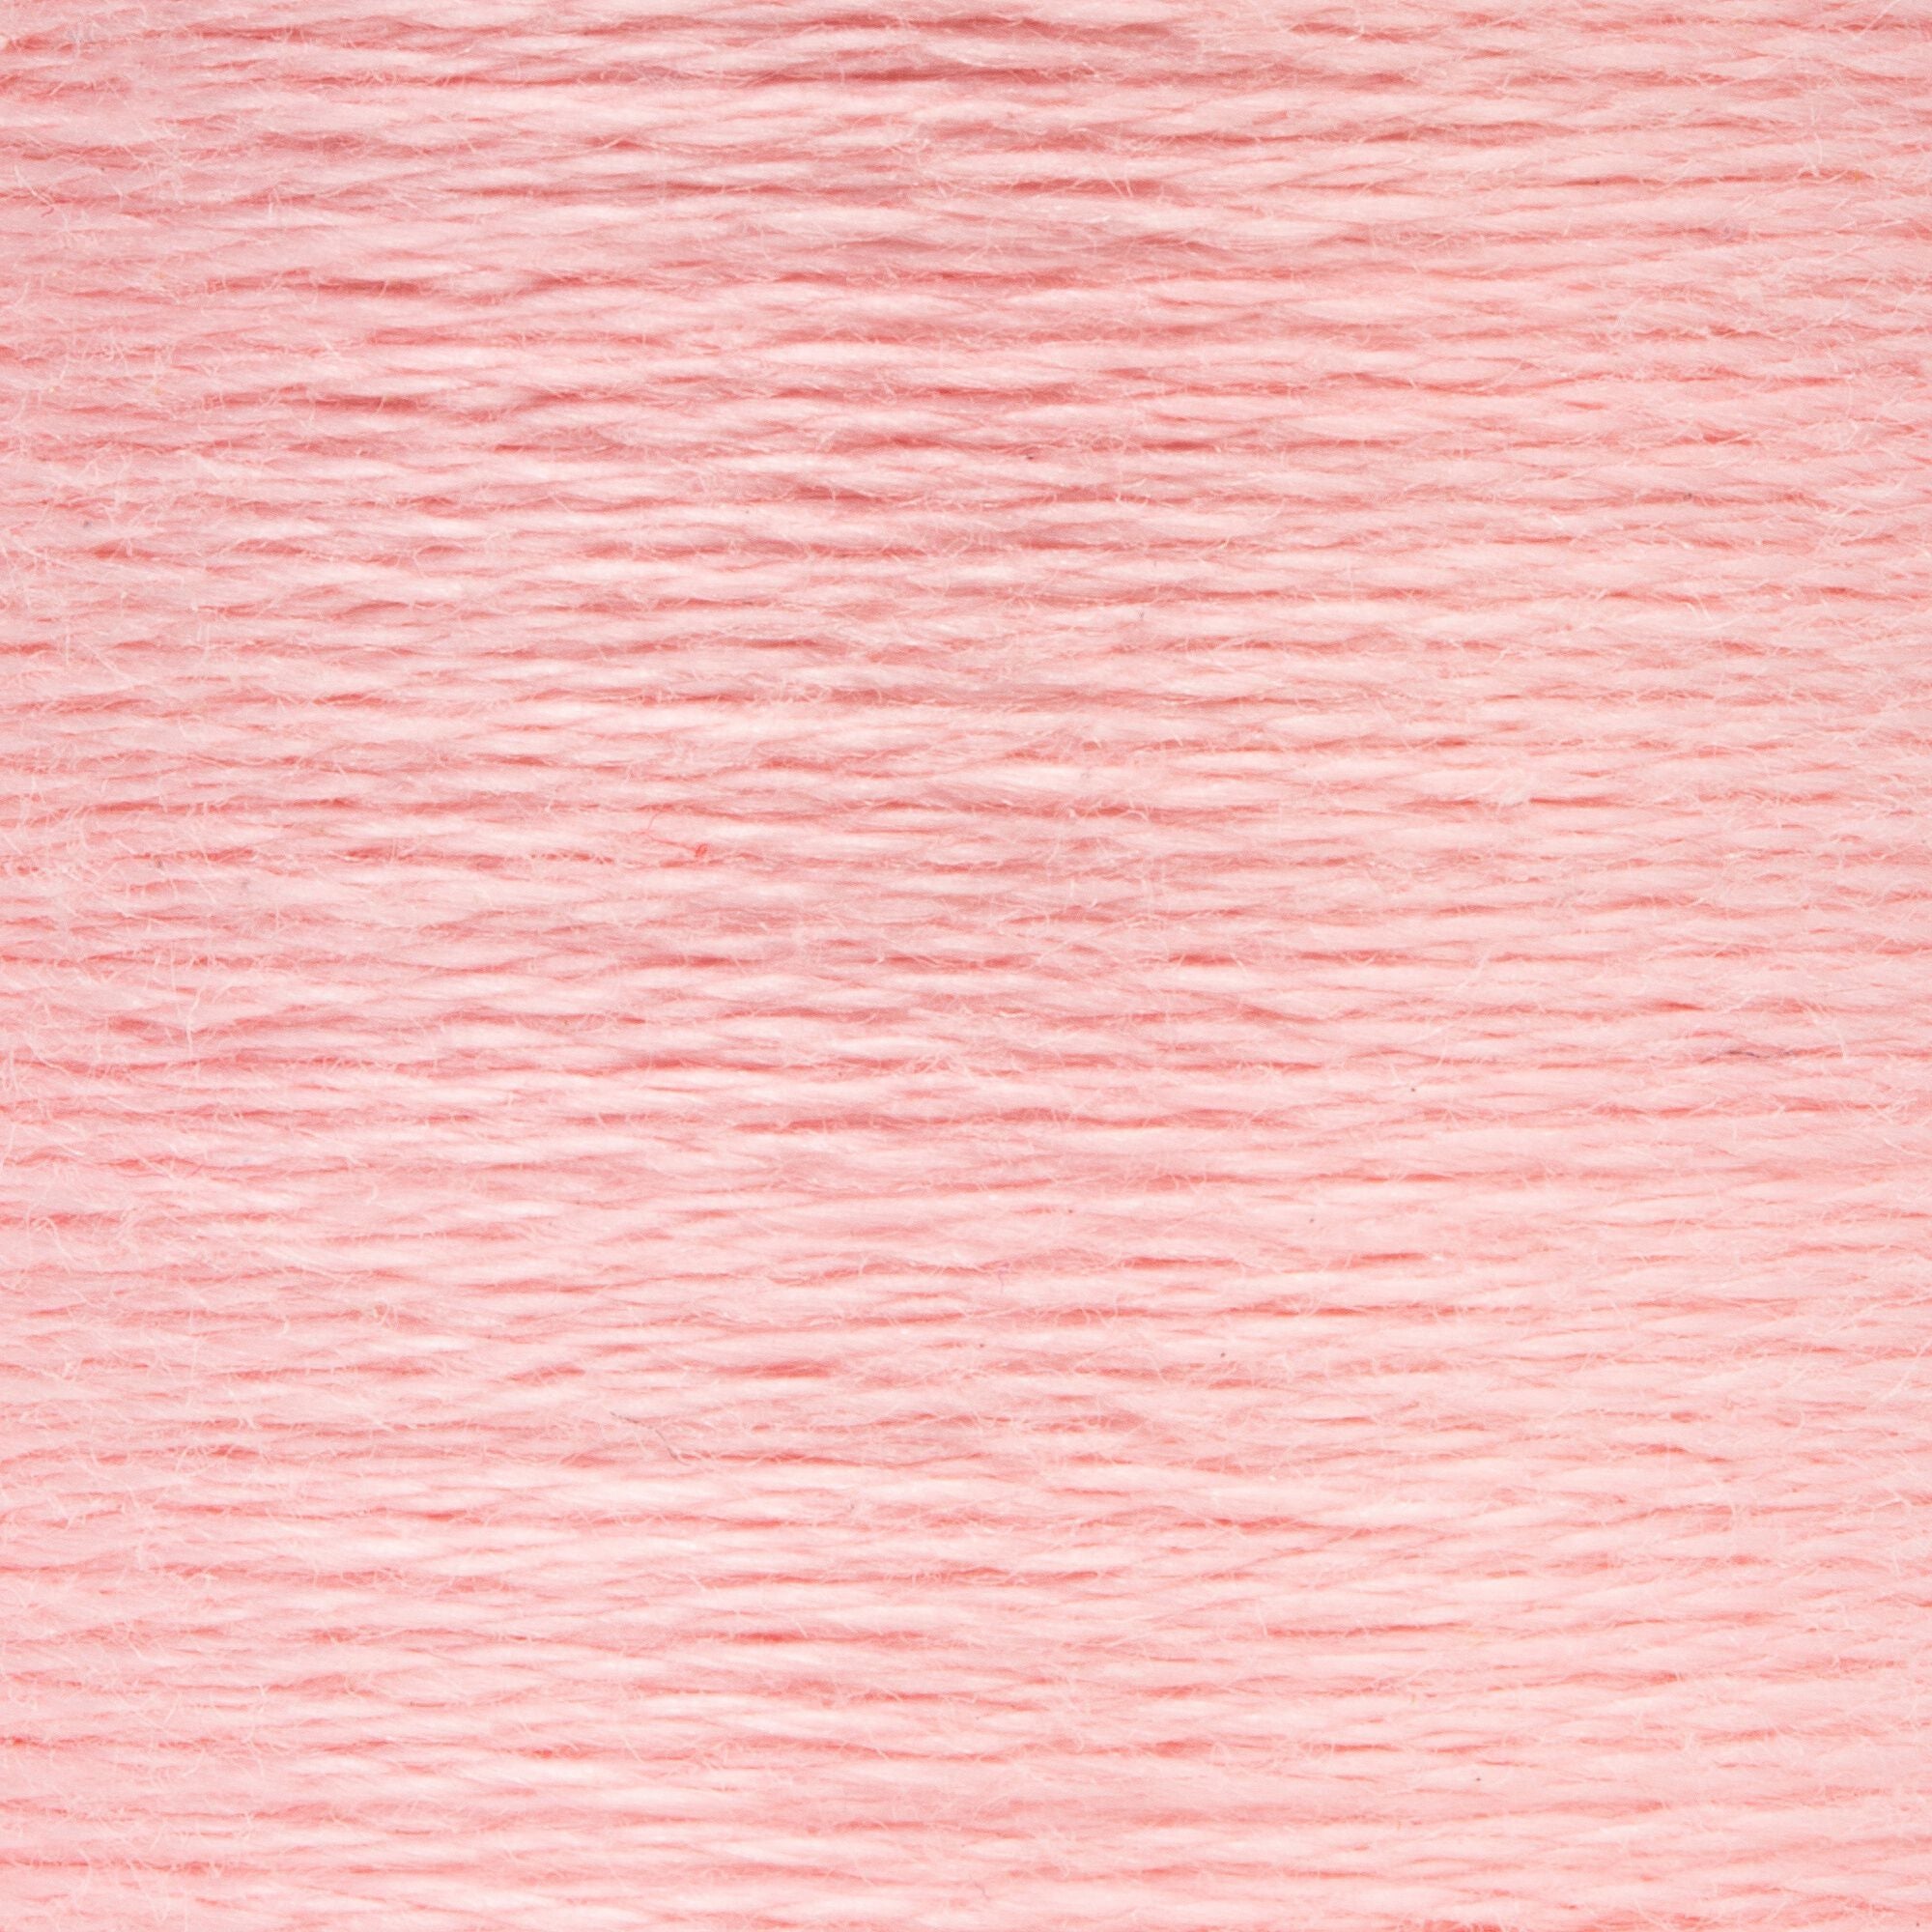 Anchor Embroidery Floss in Carnation Ul Lt